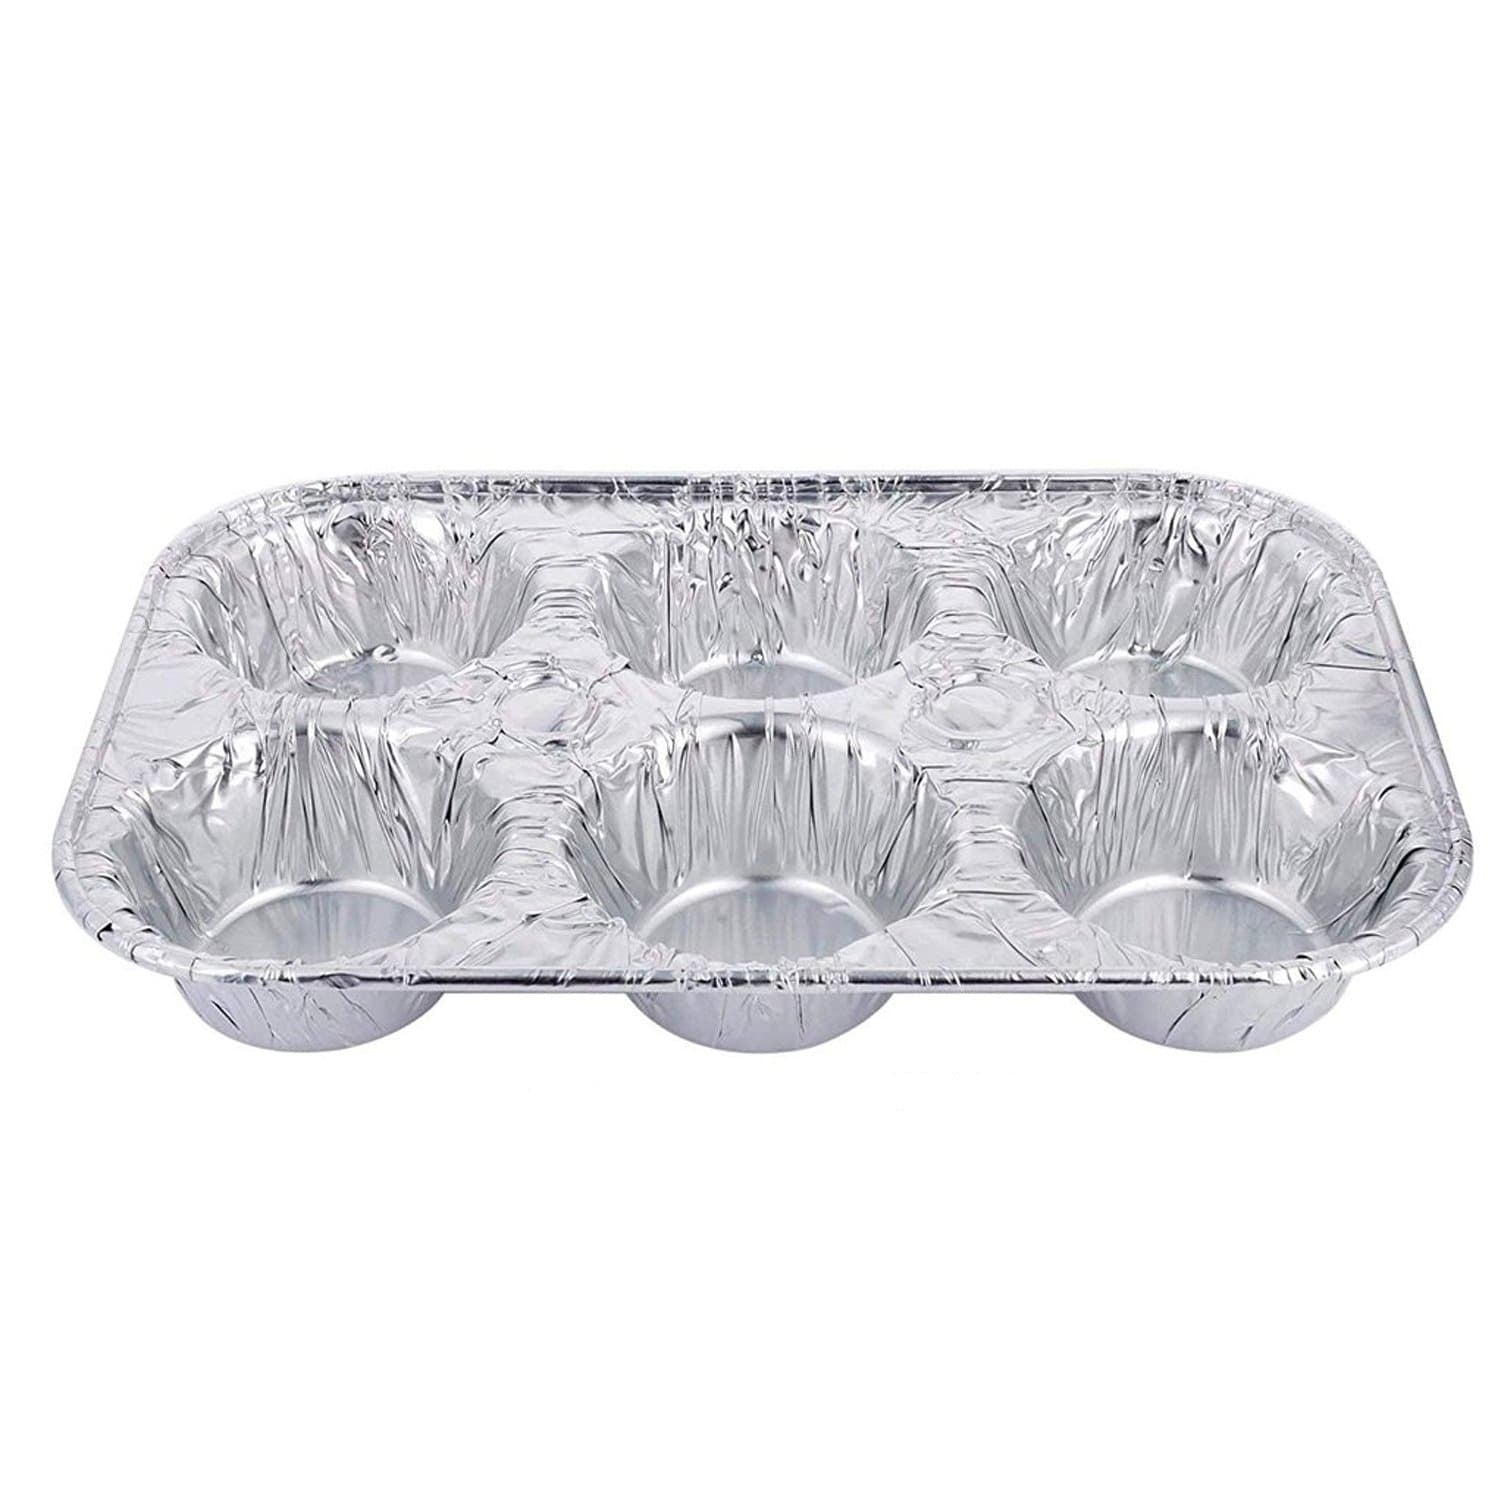 Muffin Pan, 6-Cups, Aluminum Foil, (500/Case) Durable Packing 1500-30